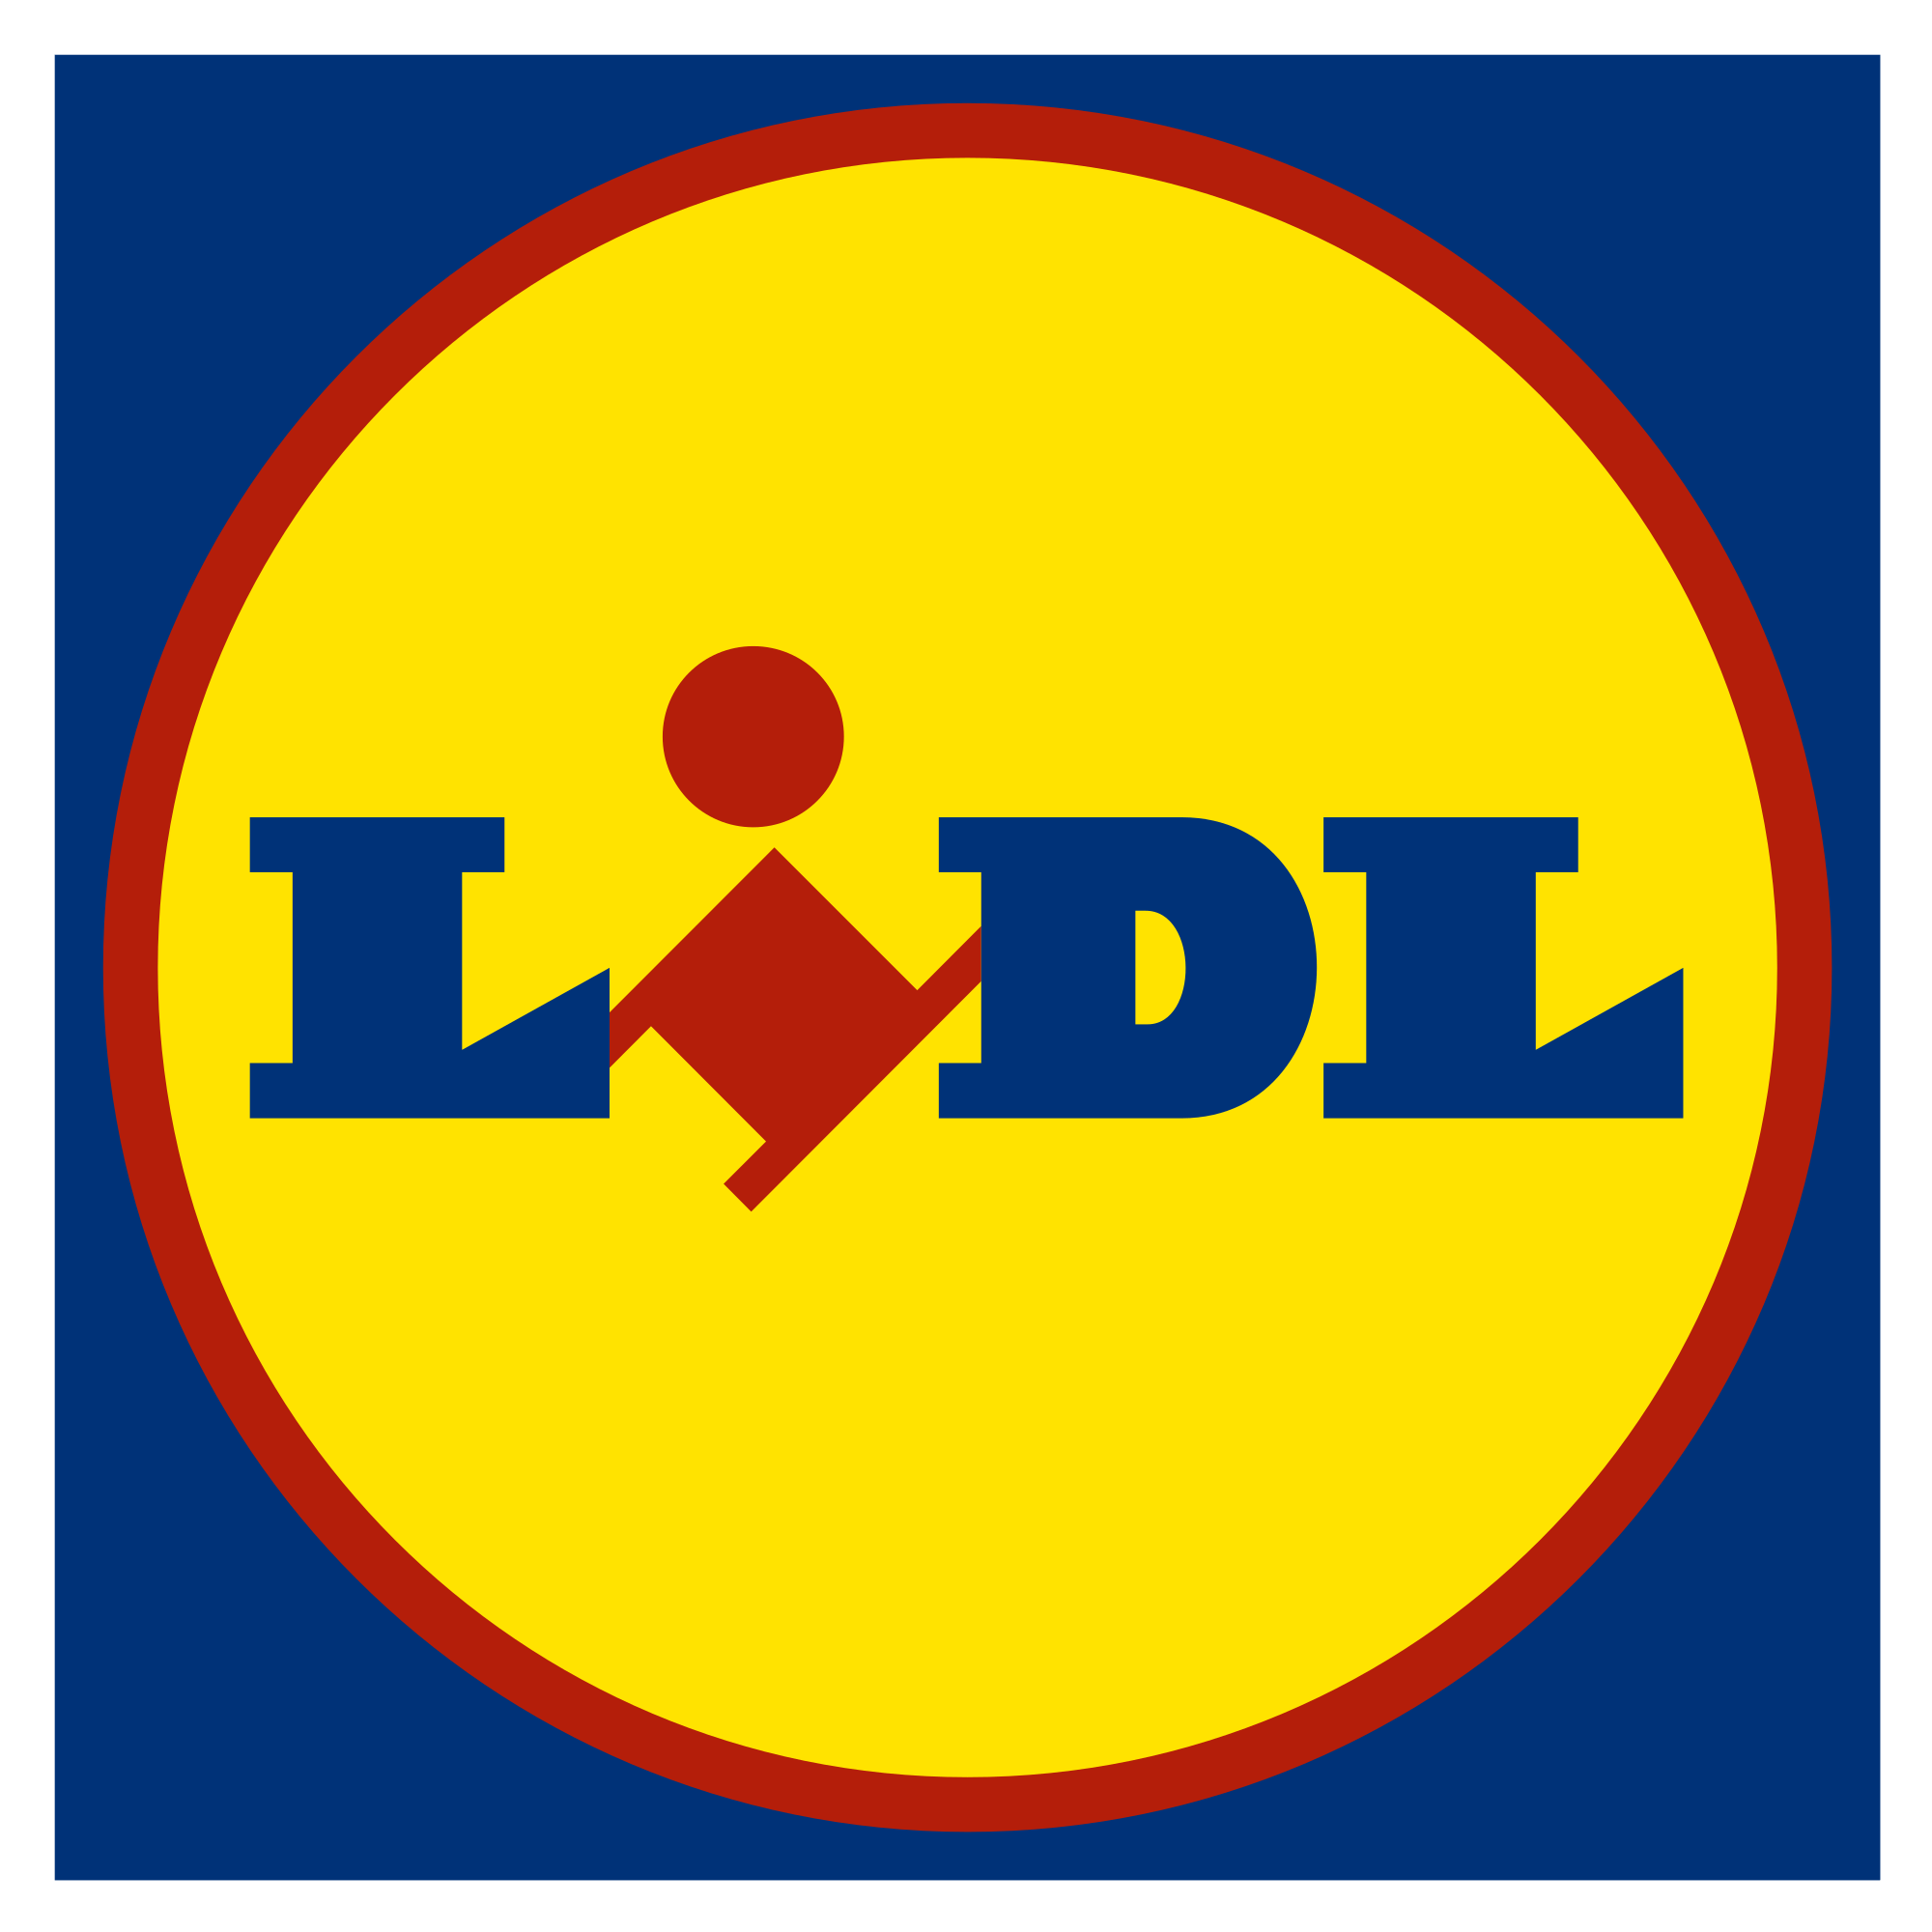 Grocery Store Starts with T Logo - Lidl